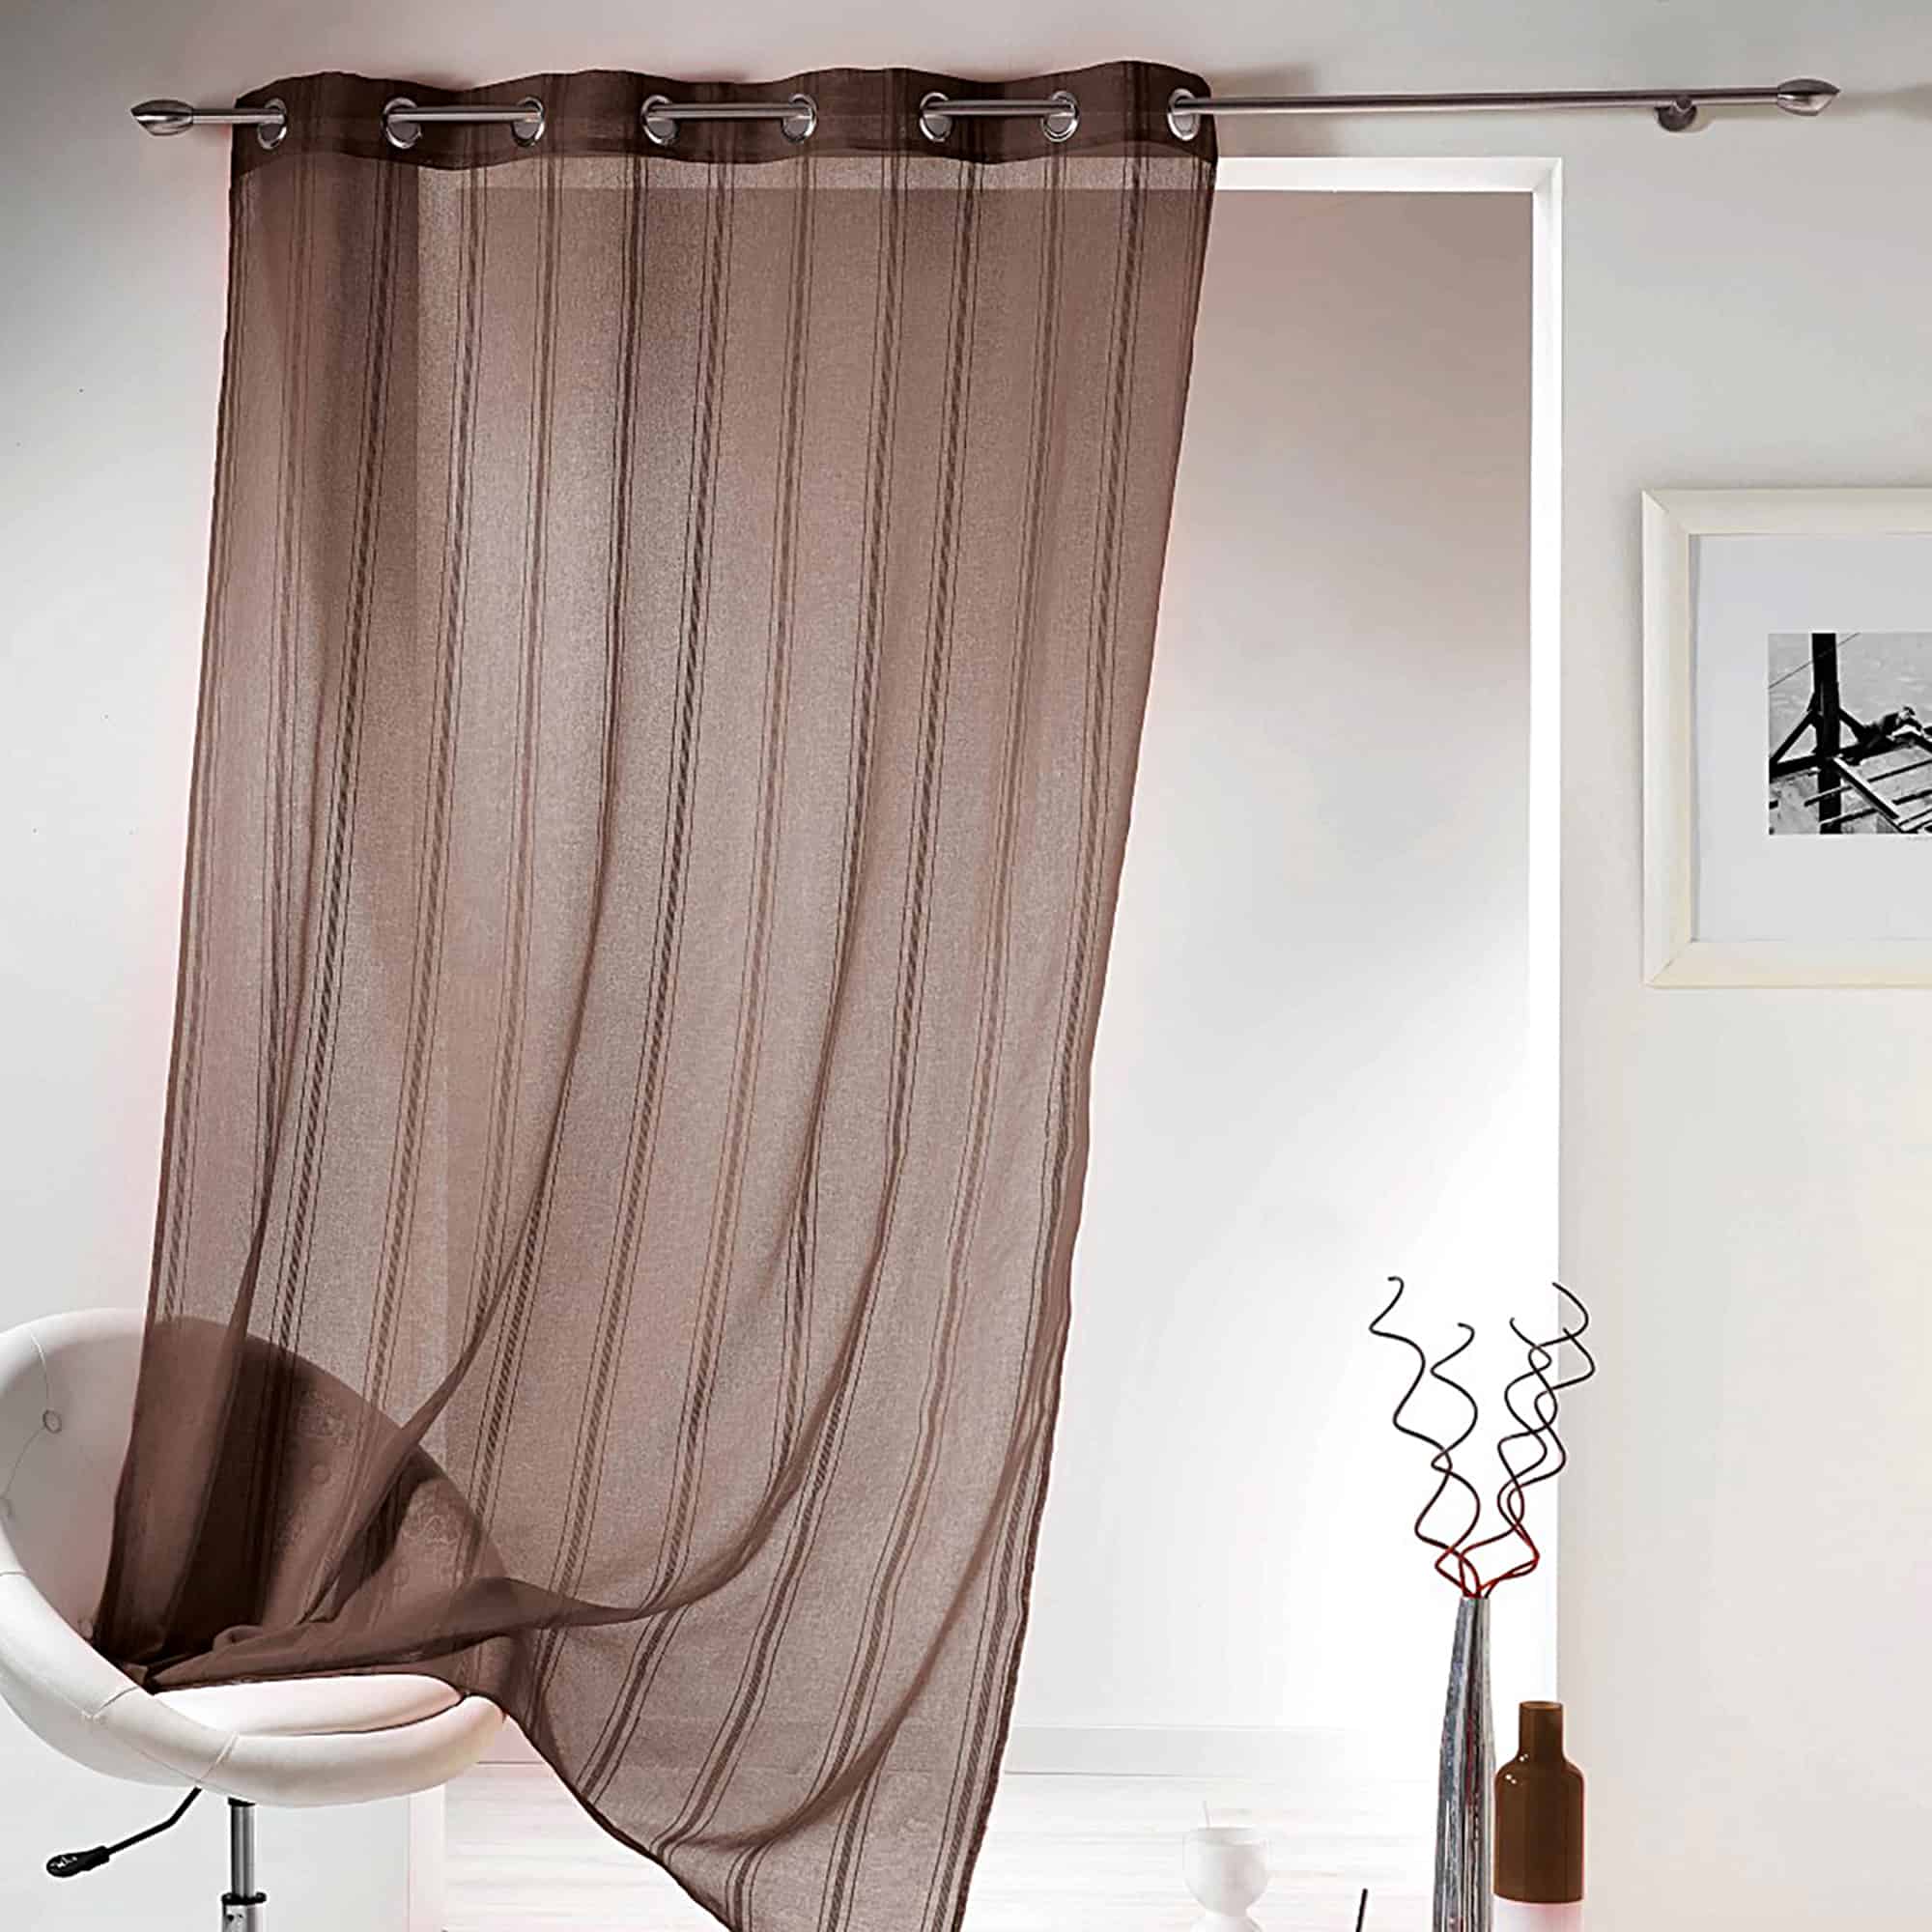 mocha brown with subtle stripes details sheer curtain panel 1 piece for large window